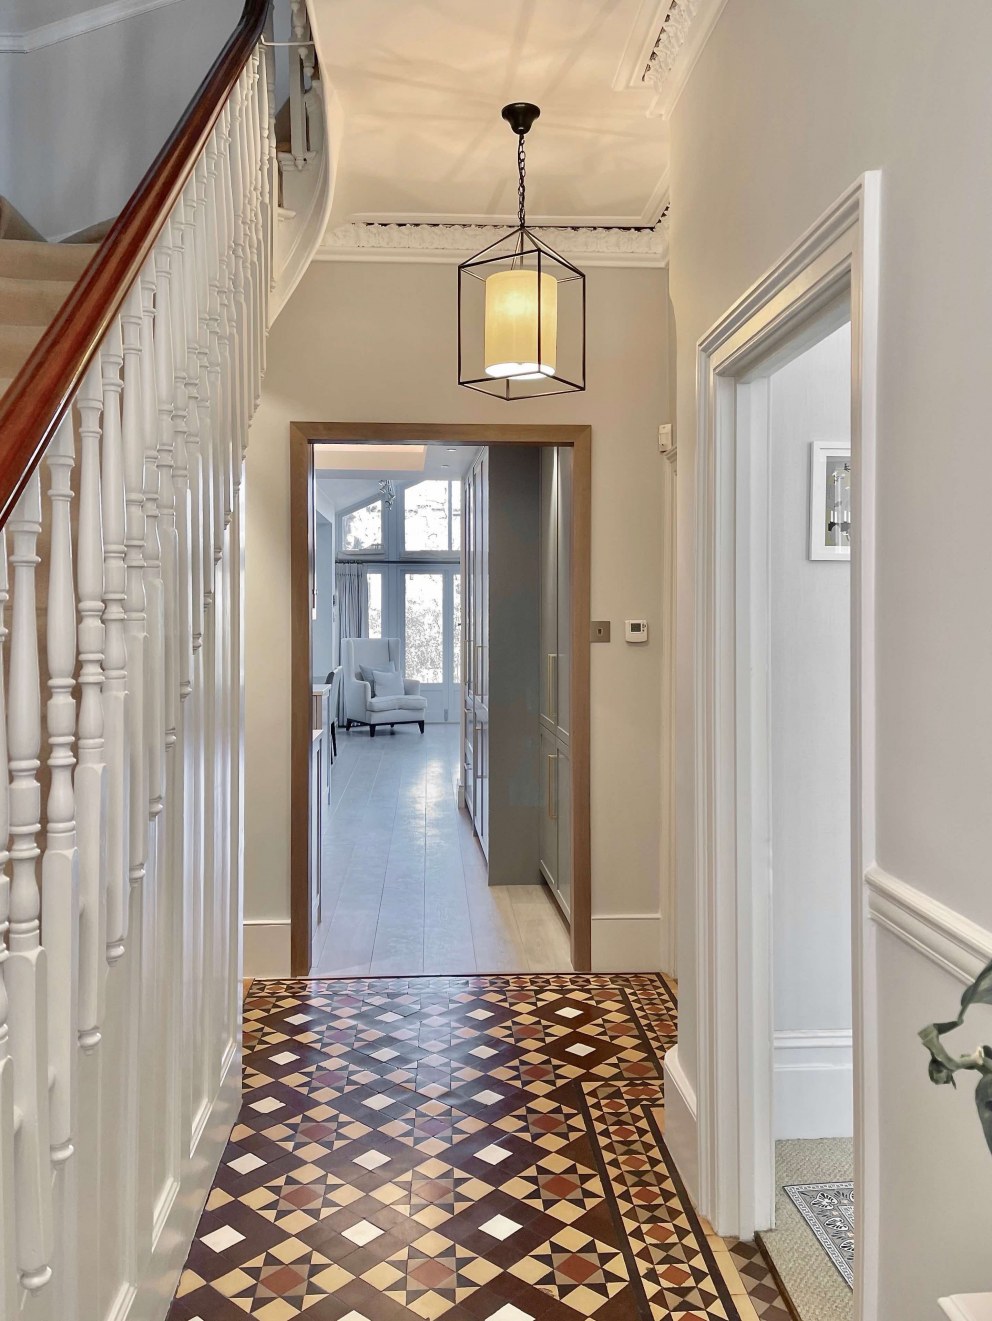 Family Townhouse, Wandsworth, London | Entrance Hall | Interior Designers